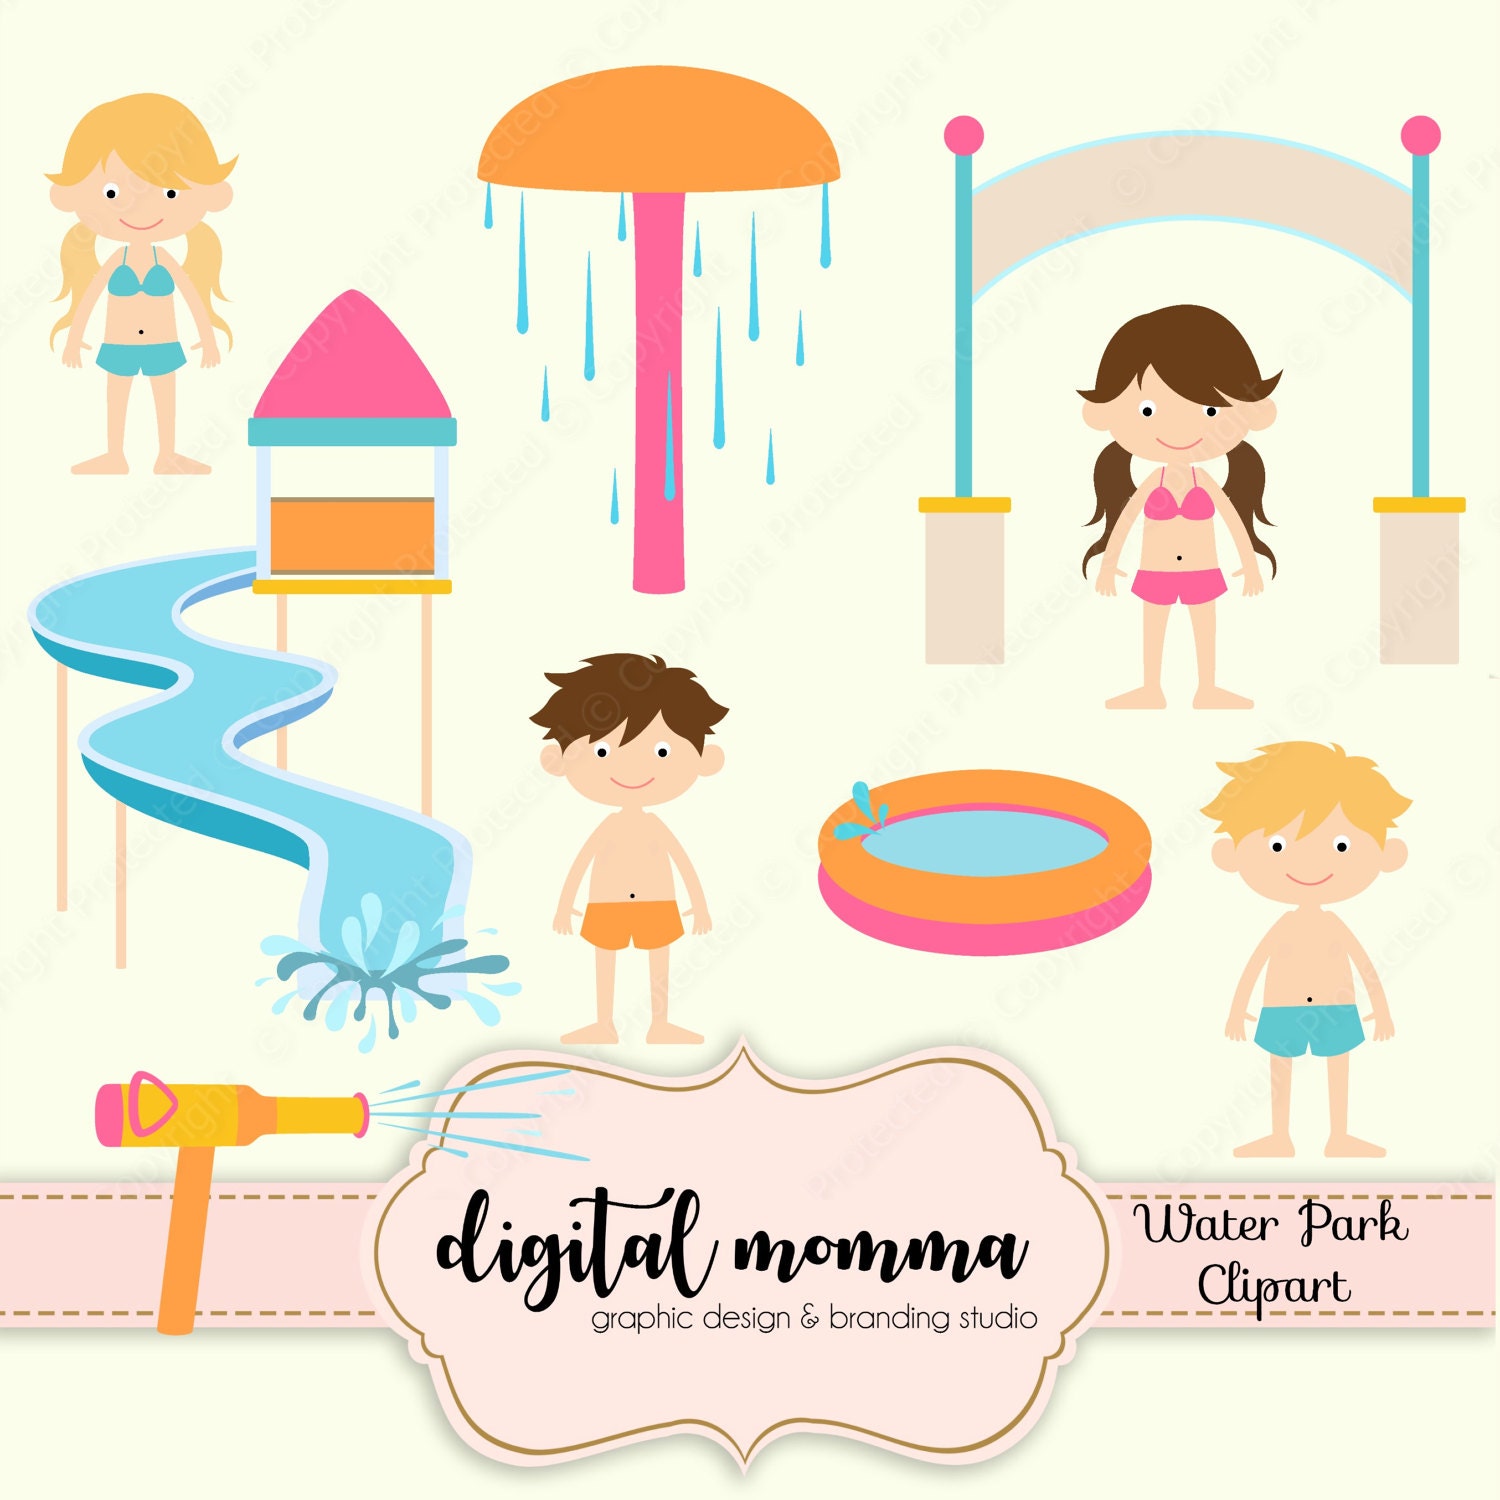 water play clipart - photo #45